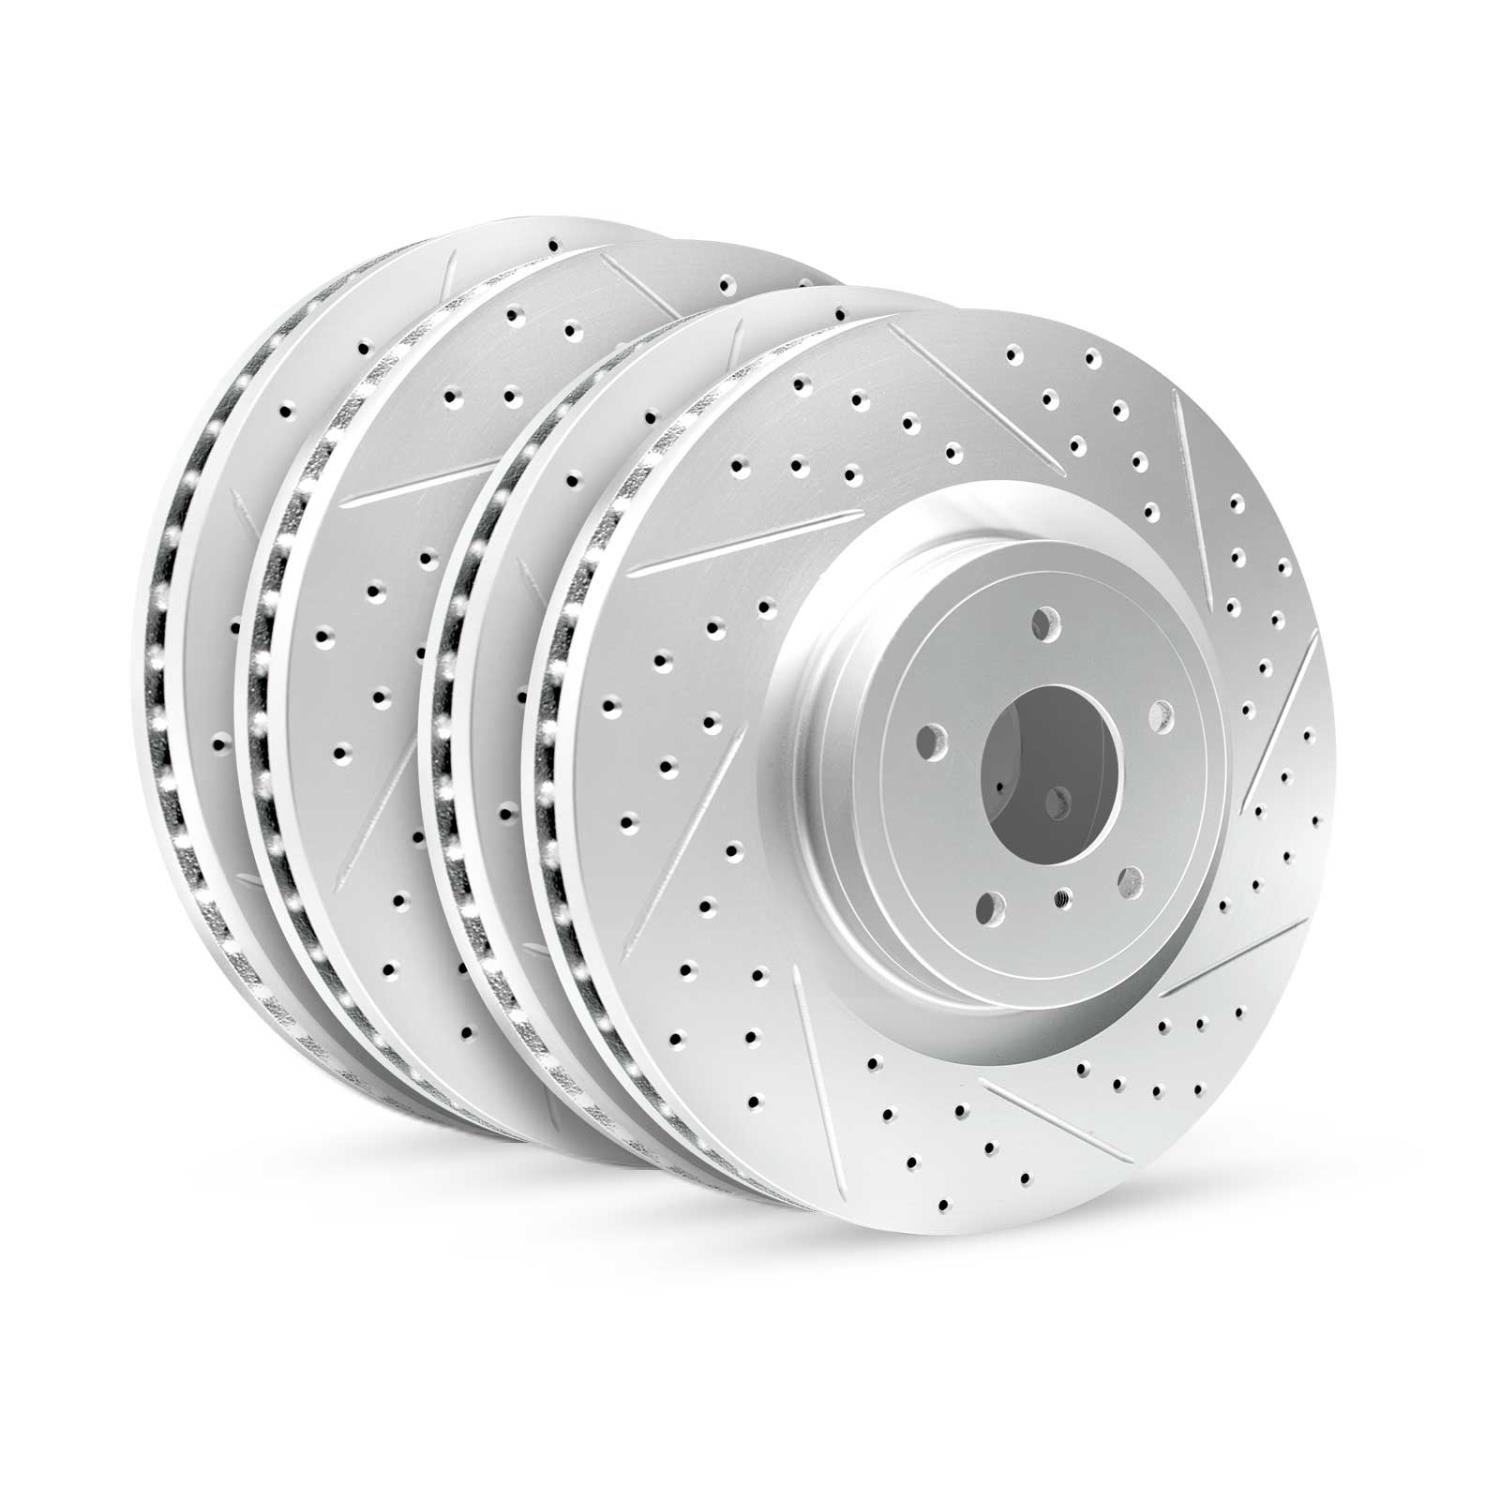 GEO-Carbon Drilled/Slotted Rotors, 2009-2015 Lexus/Toyota/Scion, Position: Front/Rear